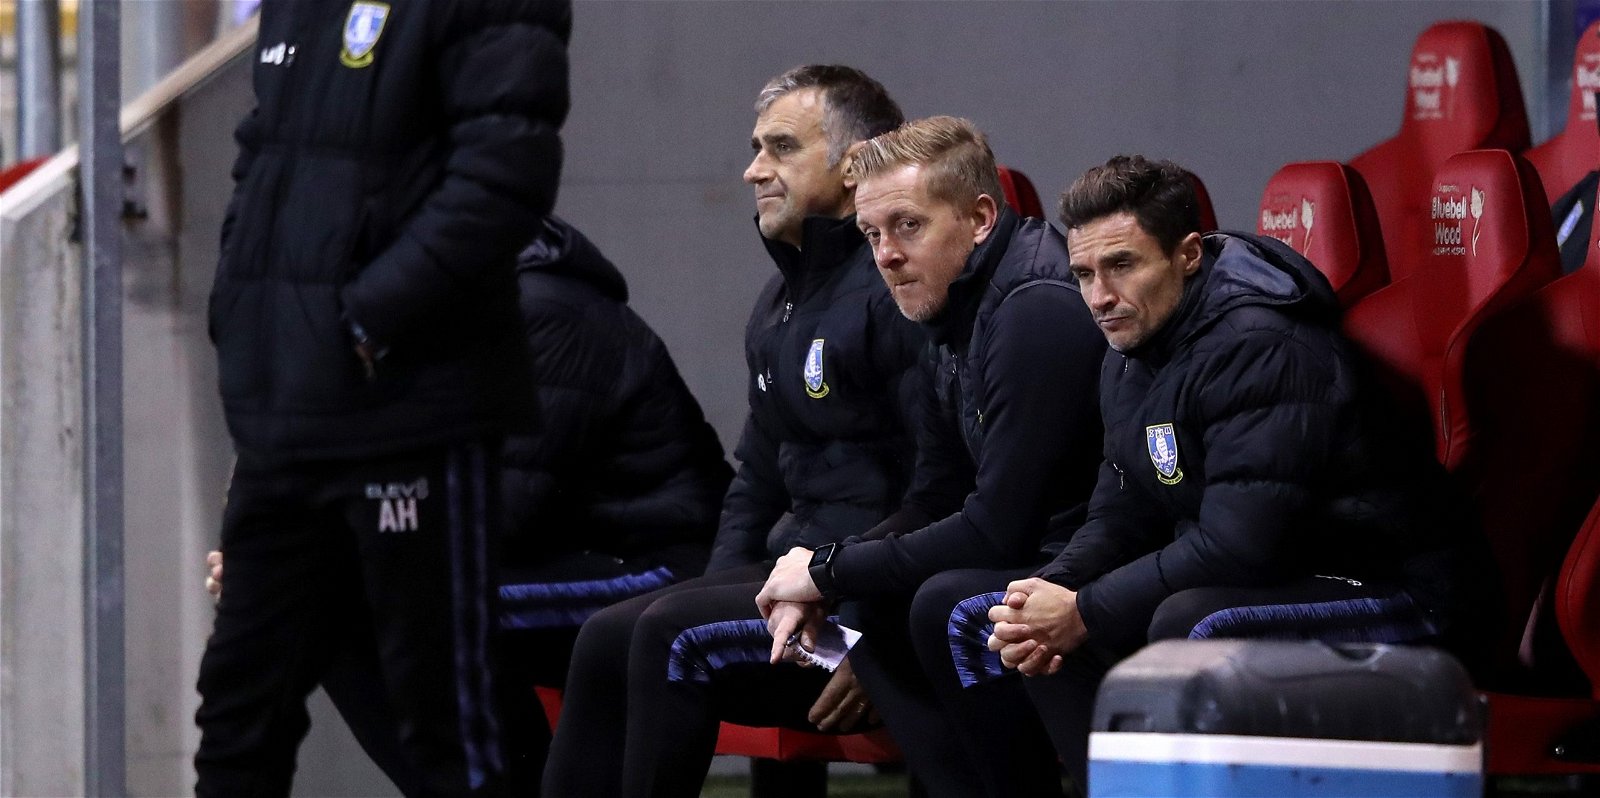 Garry Monk sacked, Sheffield Wednesday fans begin to react as Monk sacking hits Twitter